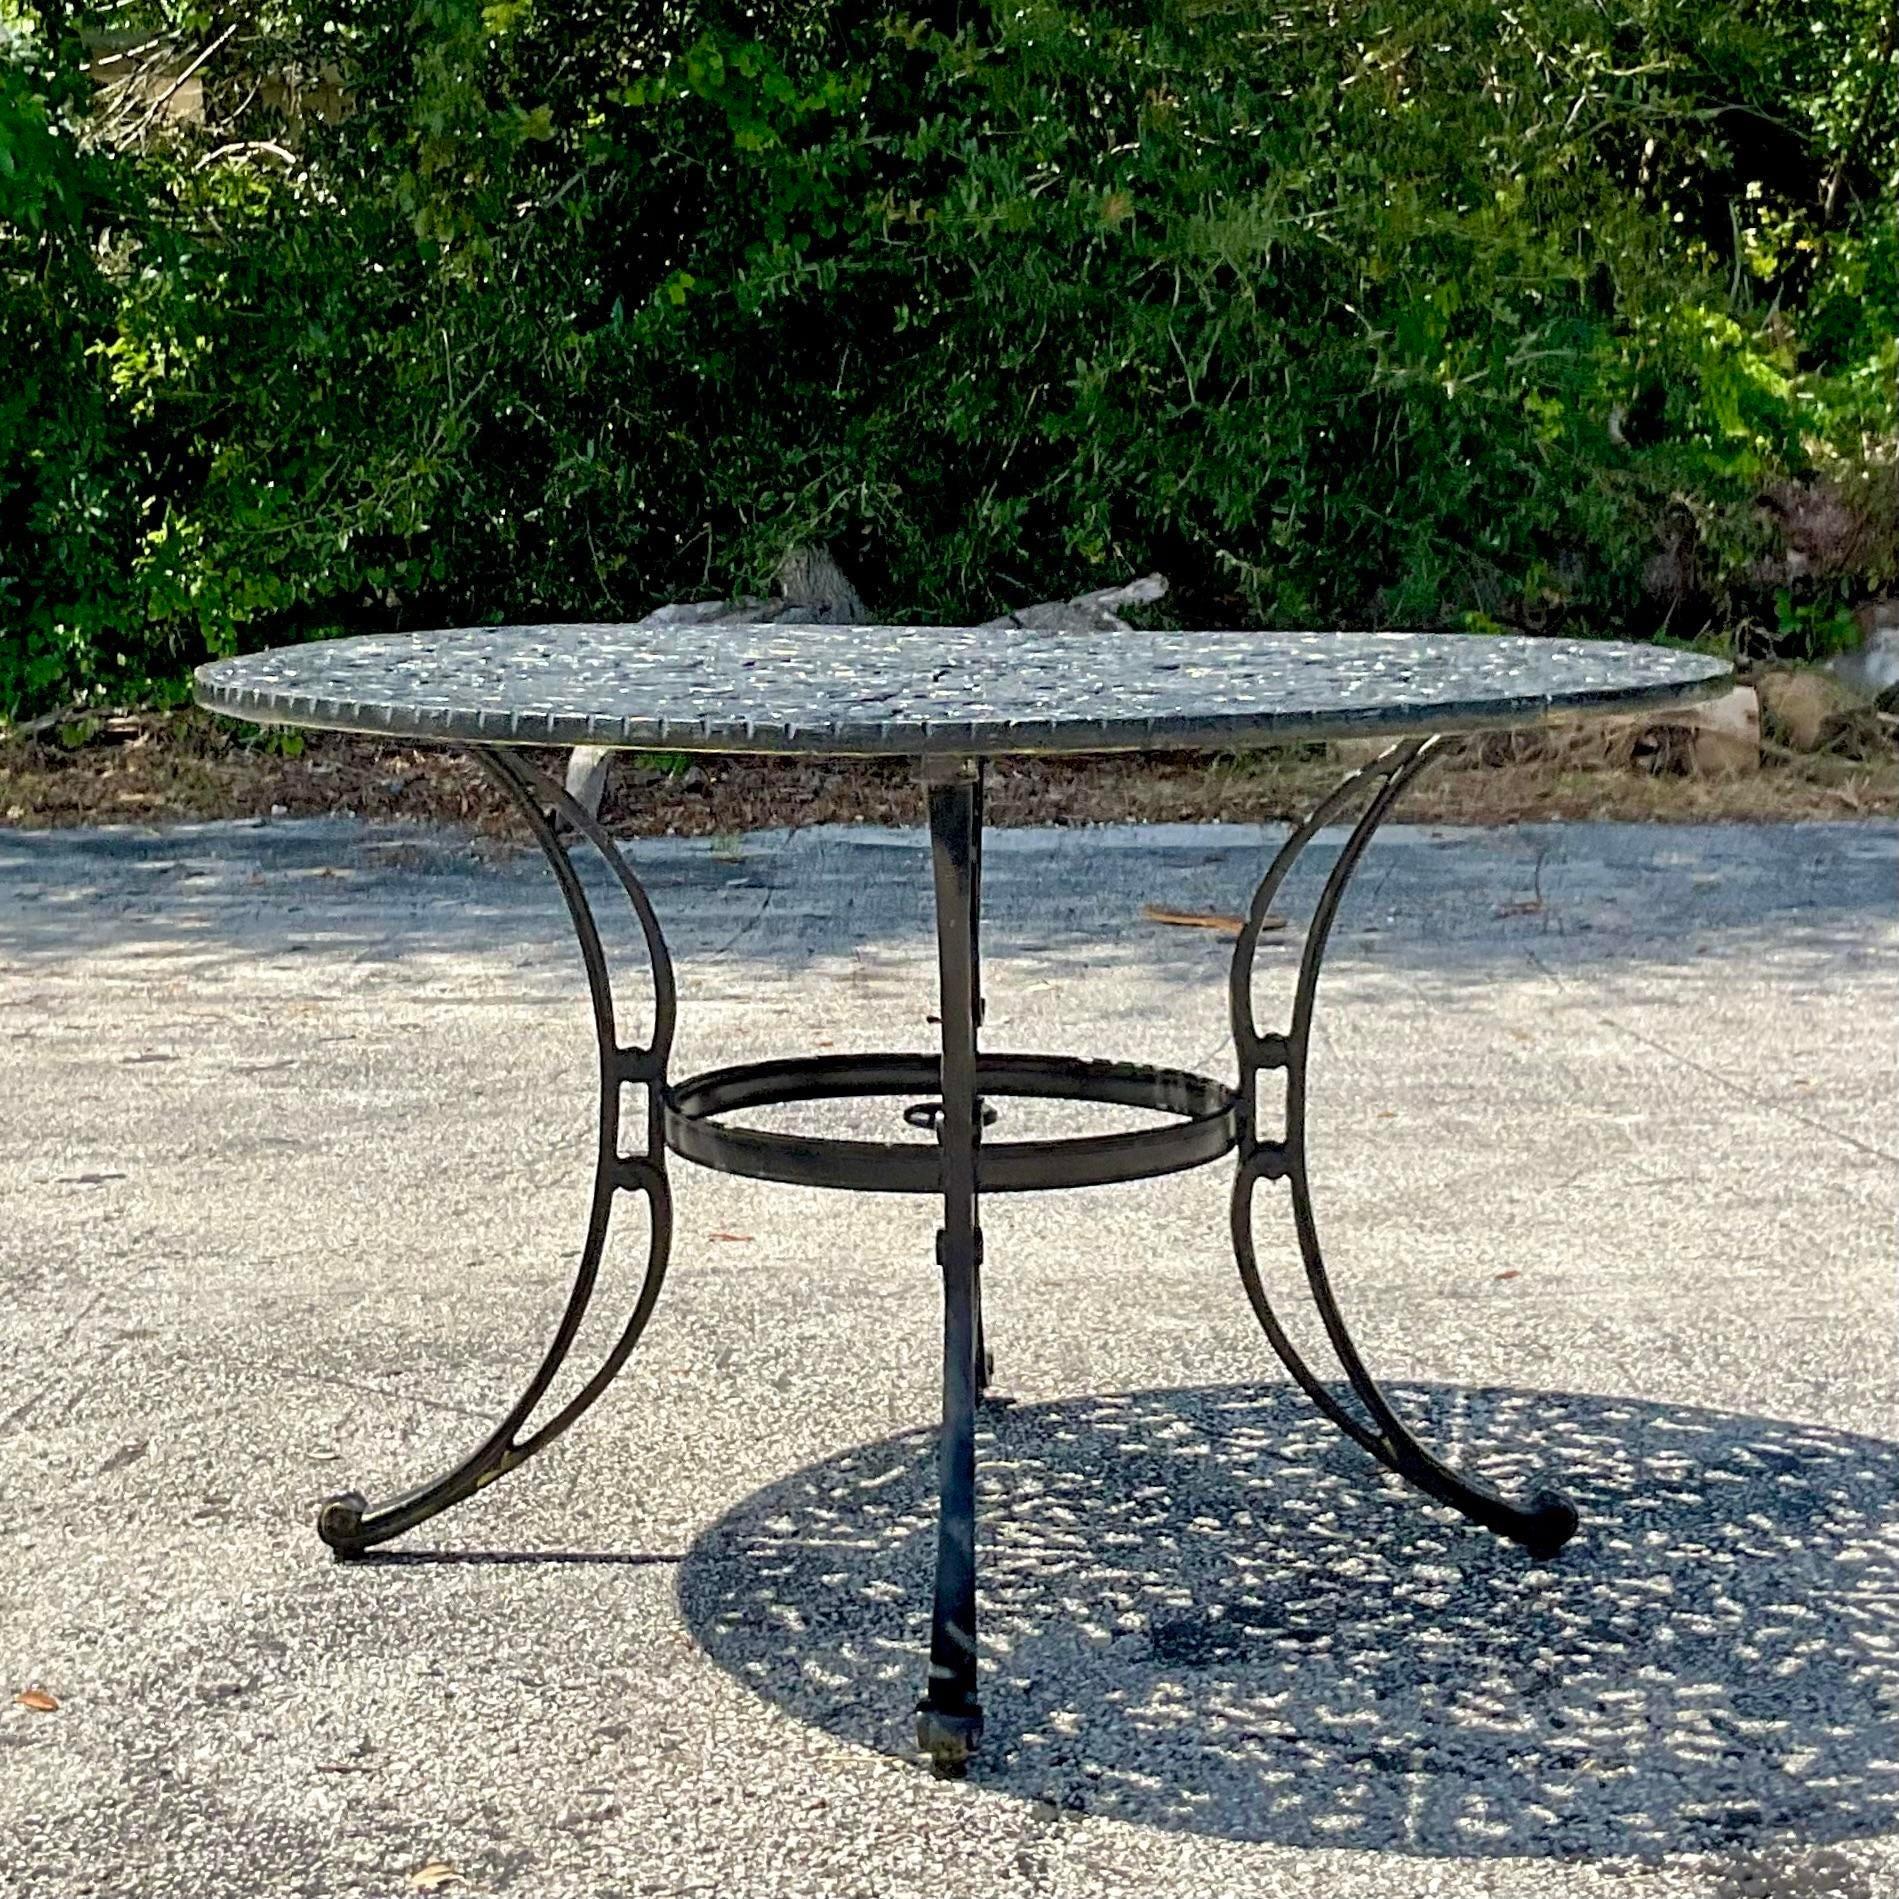 Vintage Coastal Cast Aluminum Outdoor Dining Table In Good Condition For Sale In west palm beach, FL